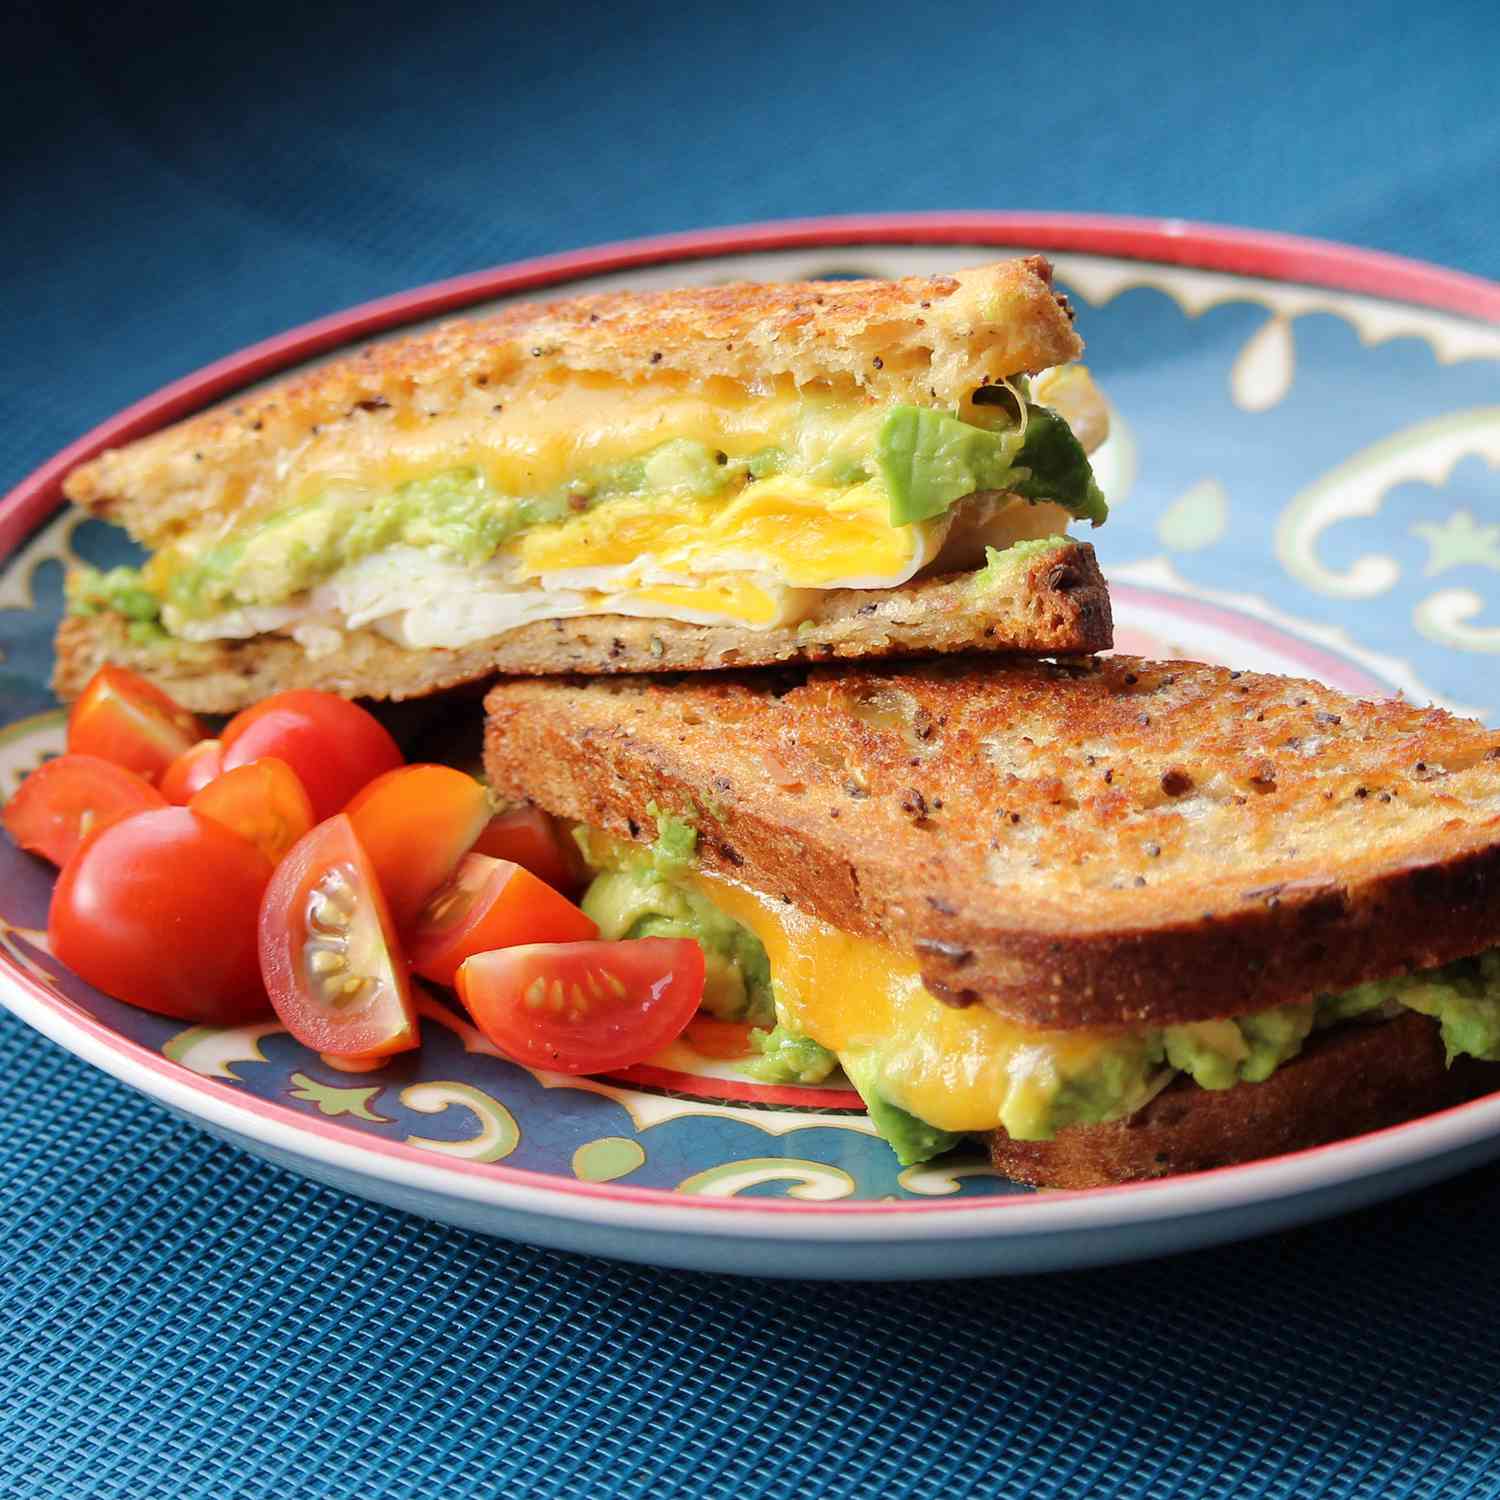 Close up view of a Avocado Breakfast Sandwich with a side of tomatoes on a plate